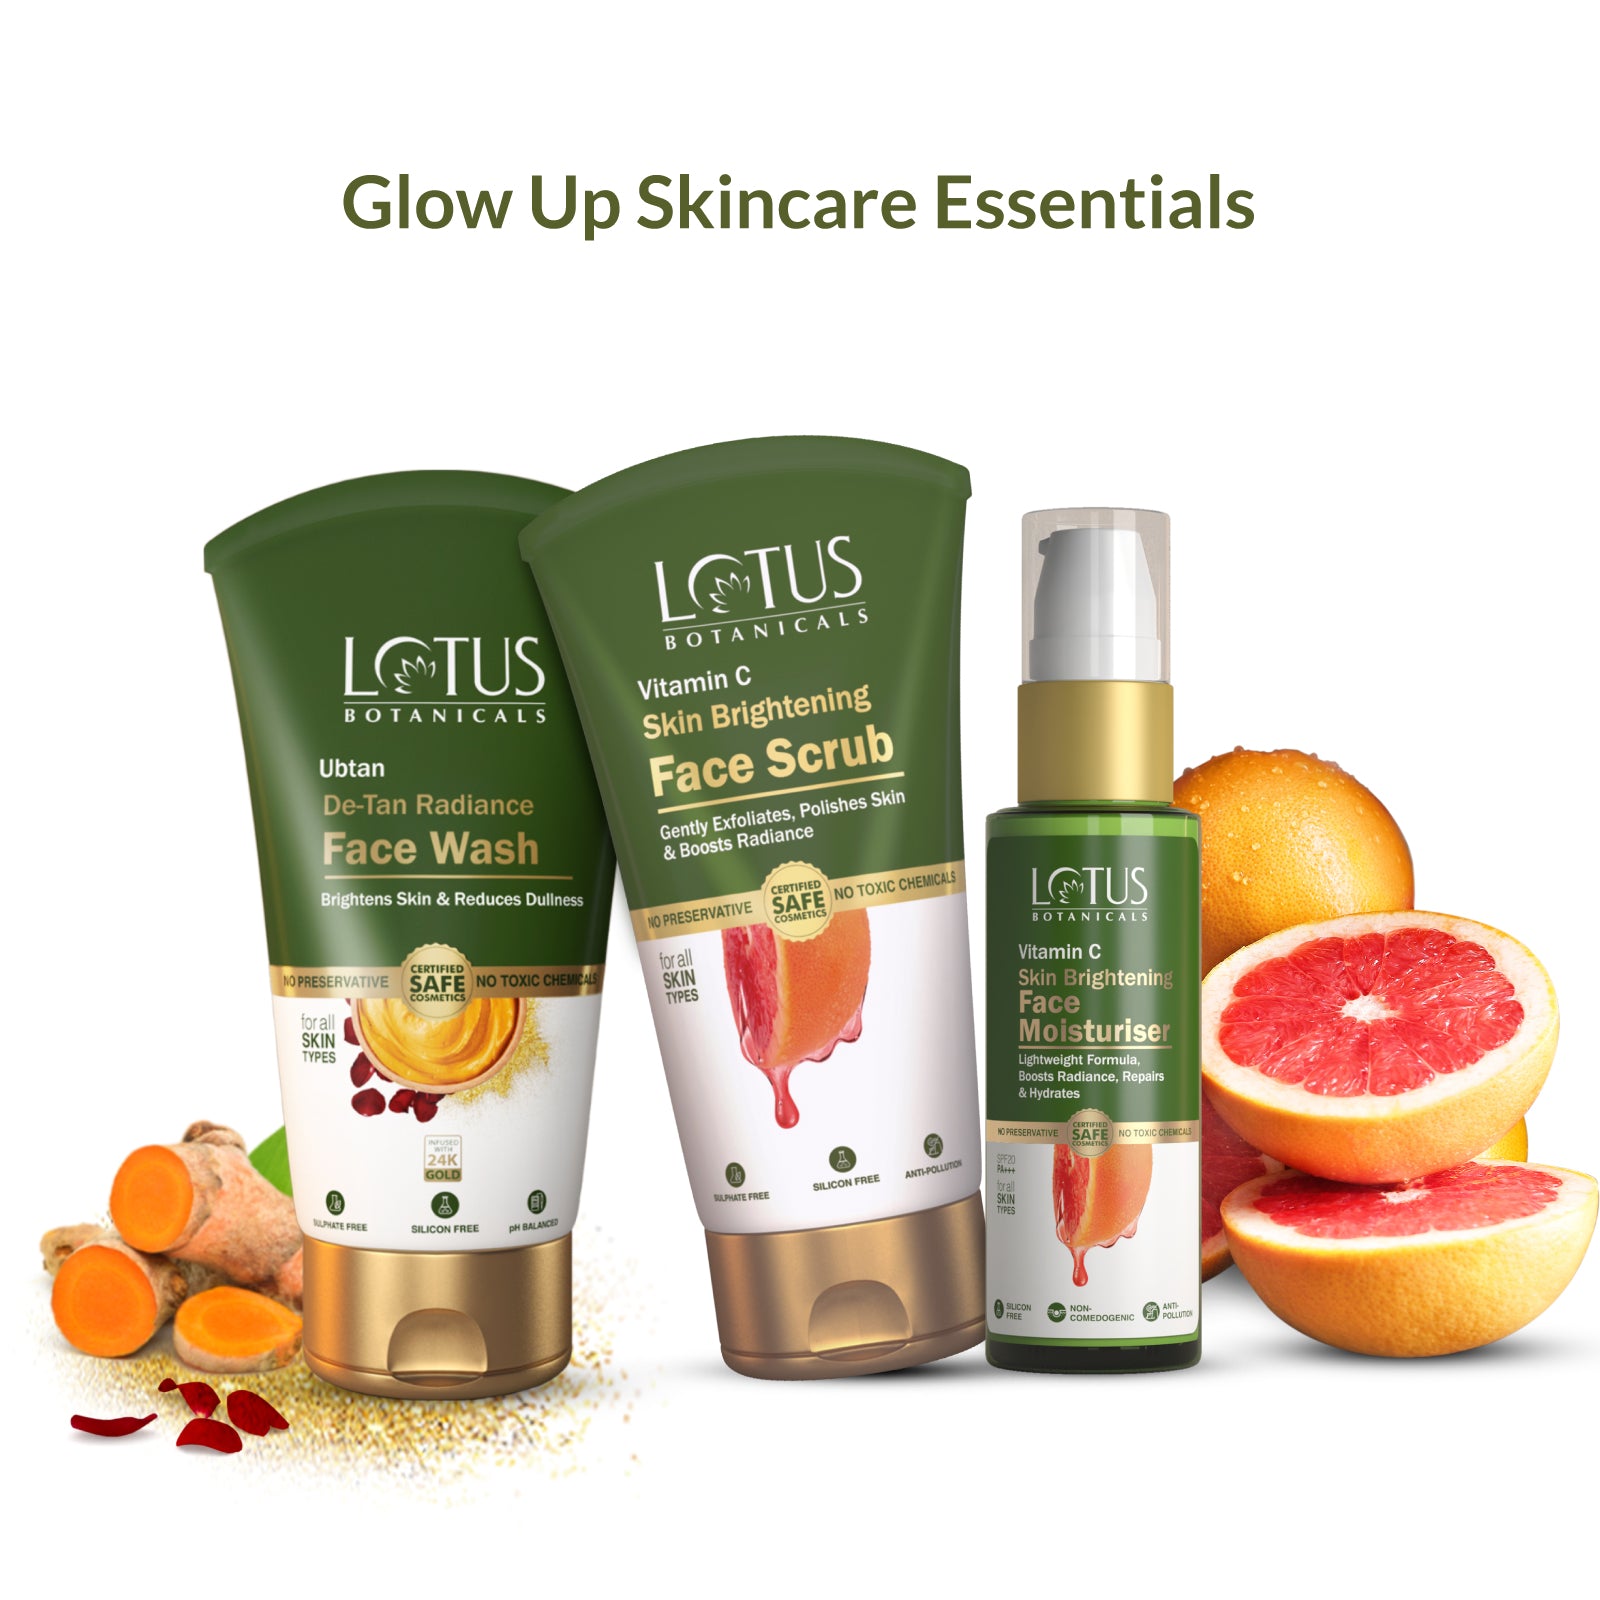 Image featuring a glowing skincare routine with essential products for a transformative skincare journey.